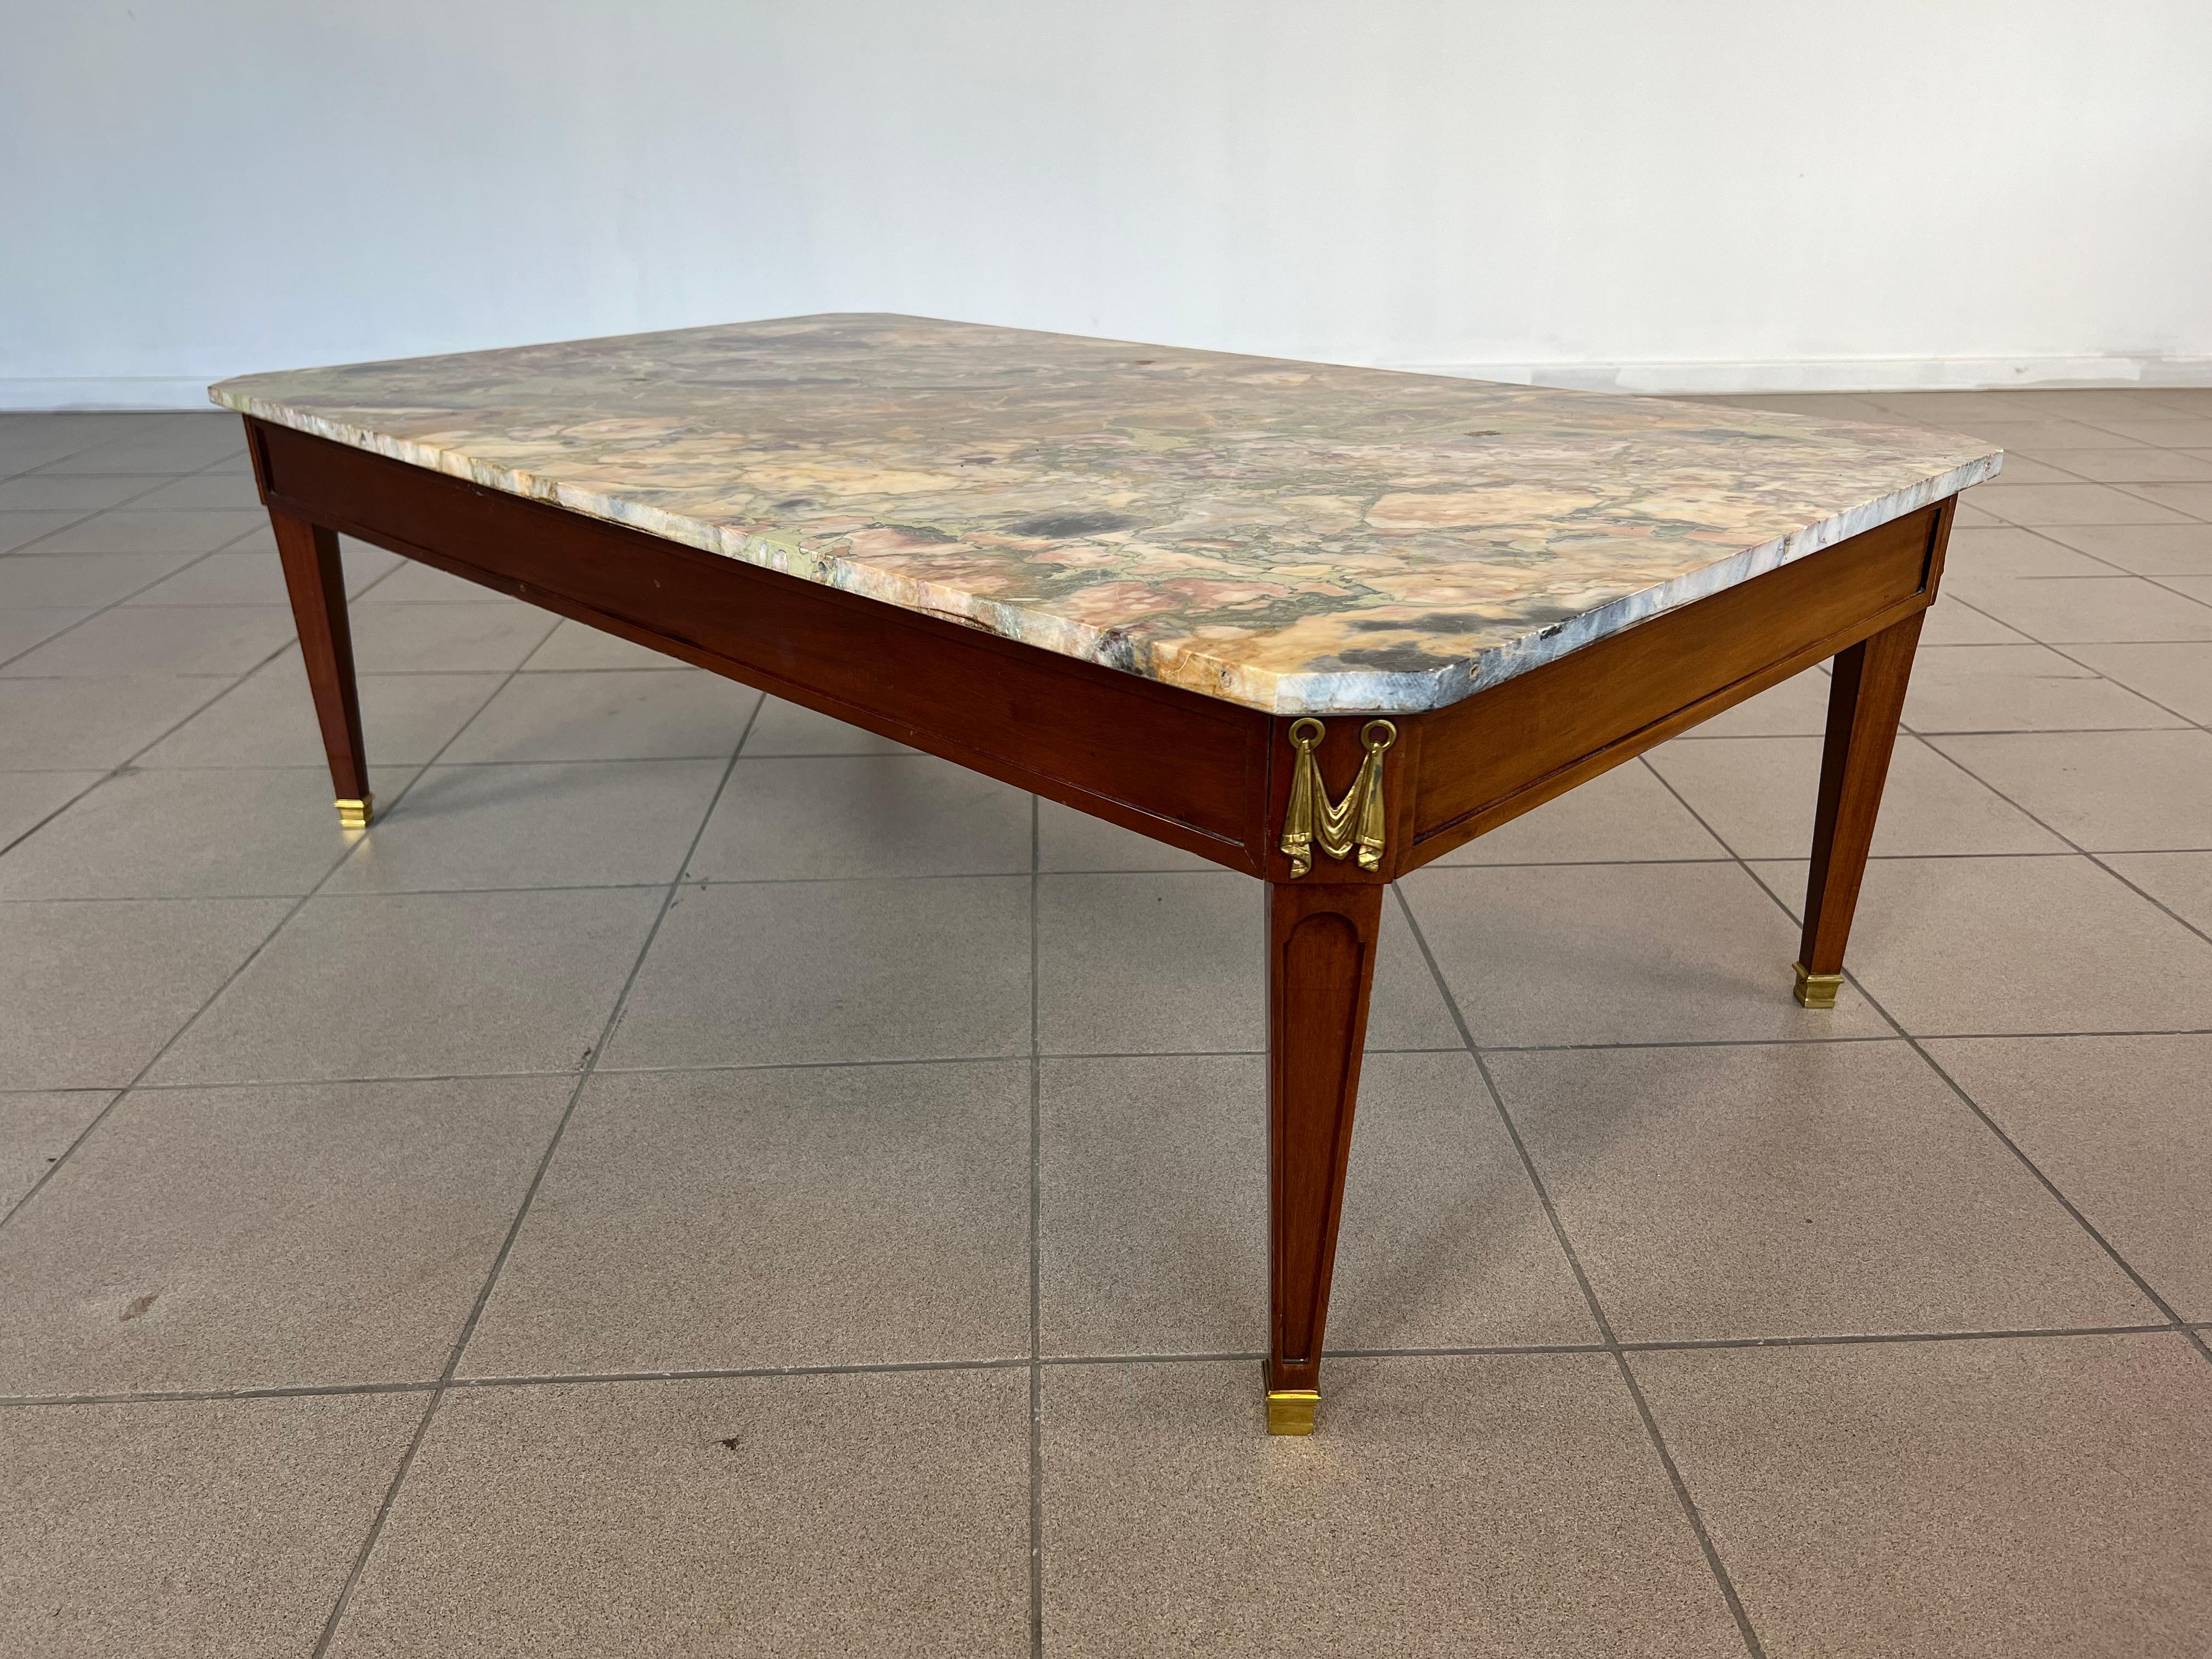 Vintage French Directoire Style Coffee Table With Brass and Marble Top In Good Condition For Sale In Bridgeport, CT